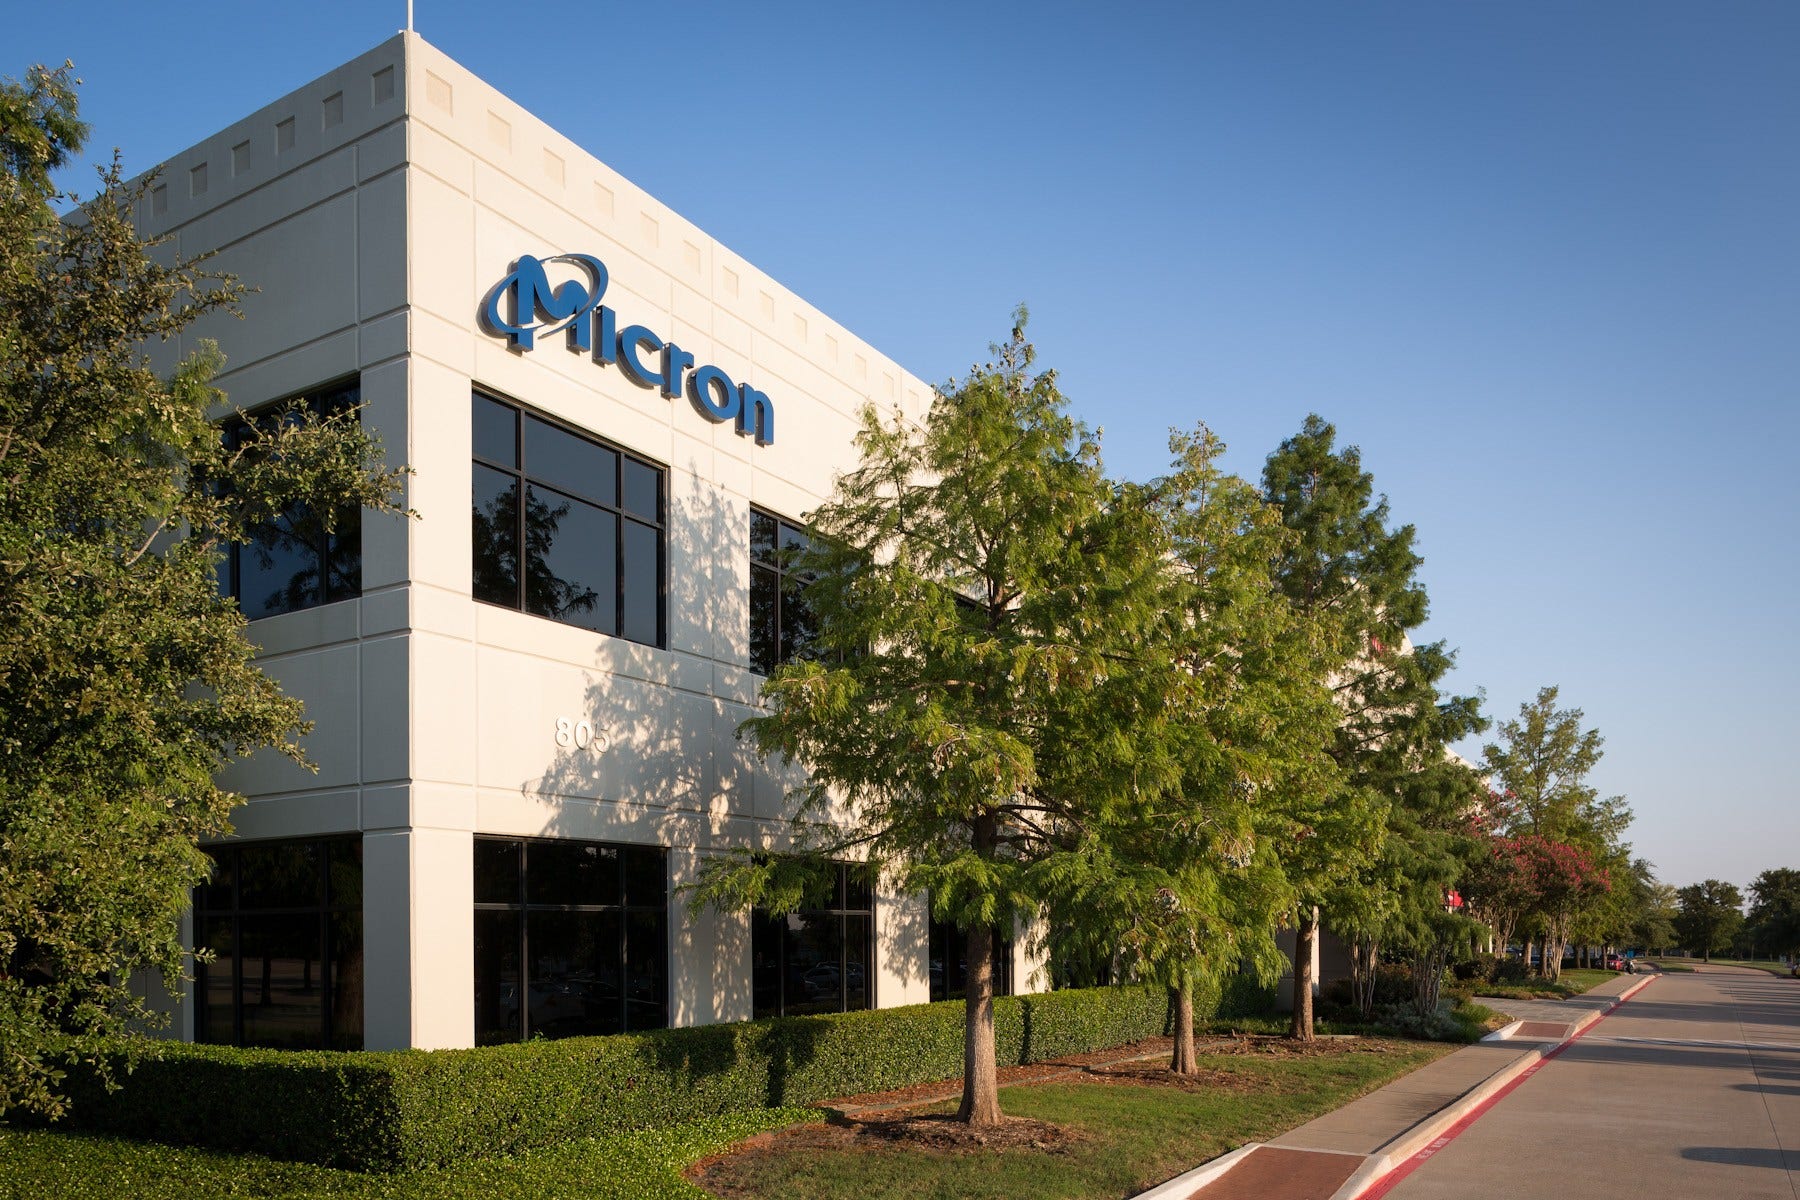 Micron Stock Is Tumbling Today: What's Going On?